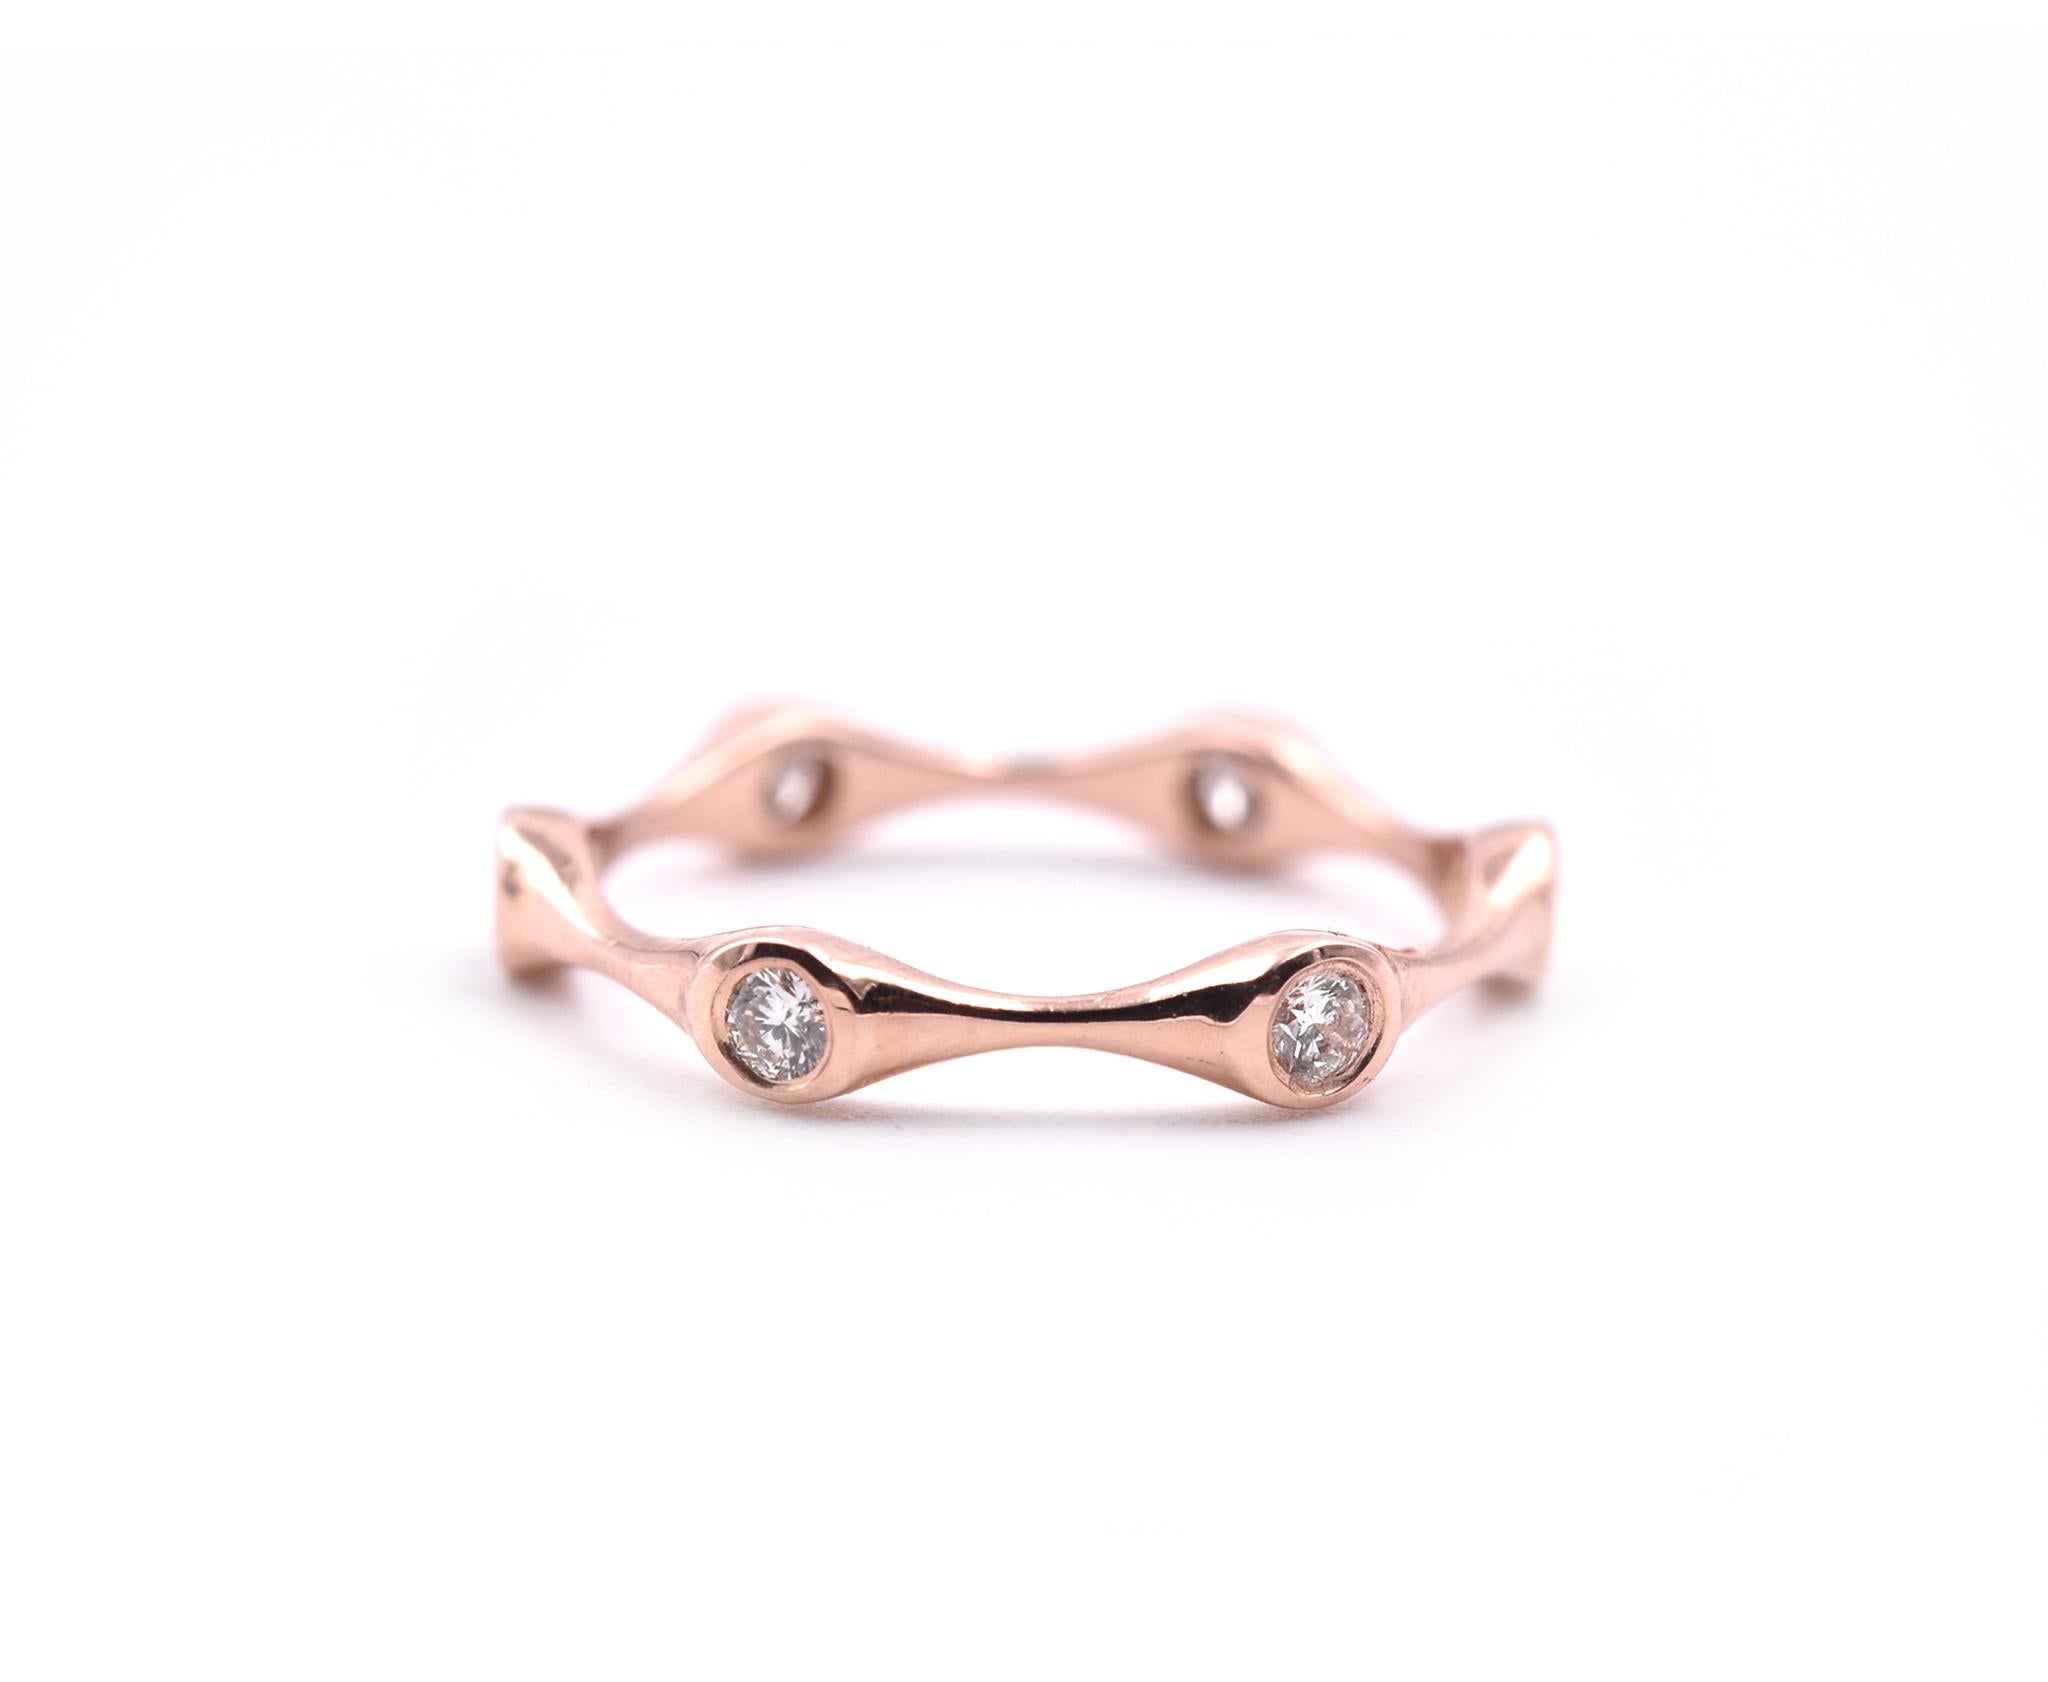 Designer: custom design
Material: 14k rose gold
Diamonds: 6 round brilliant cut= .27cttw
Color: G
Clarity: VS
Size: 6.75 (please allow two additional shipping days for sizing requests)
Dimensions: ring is 3.25mm wide
Weight: 1.67 grams
